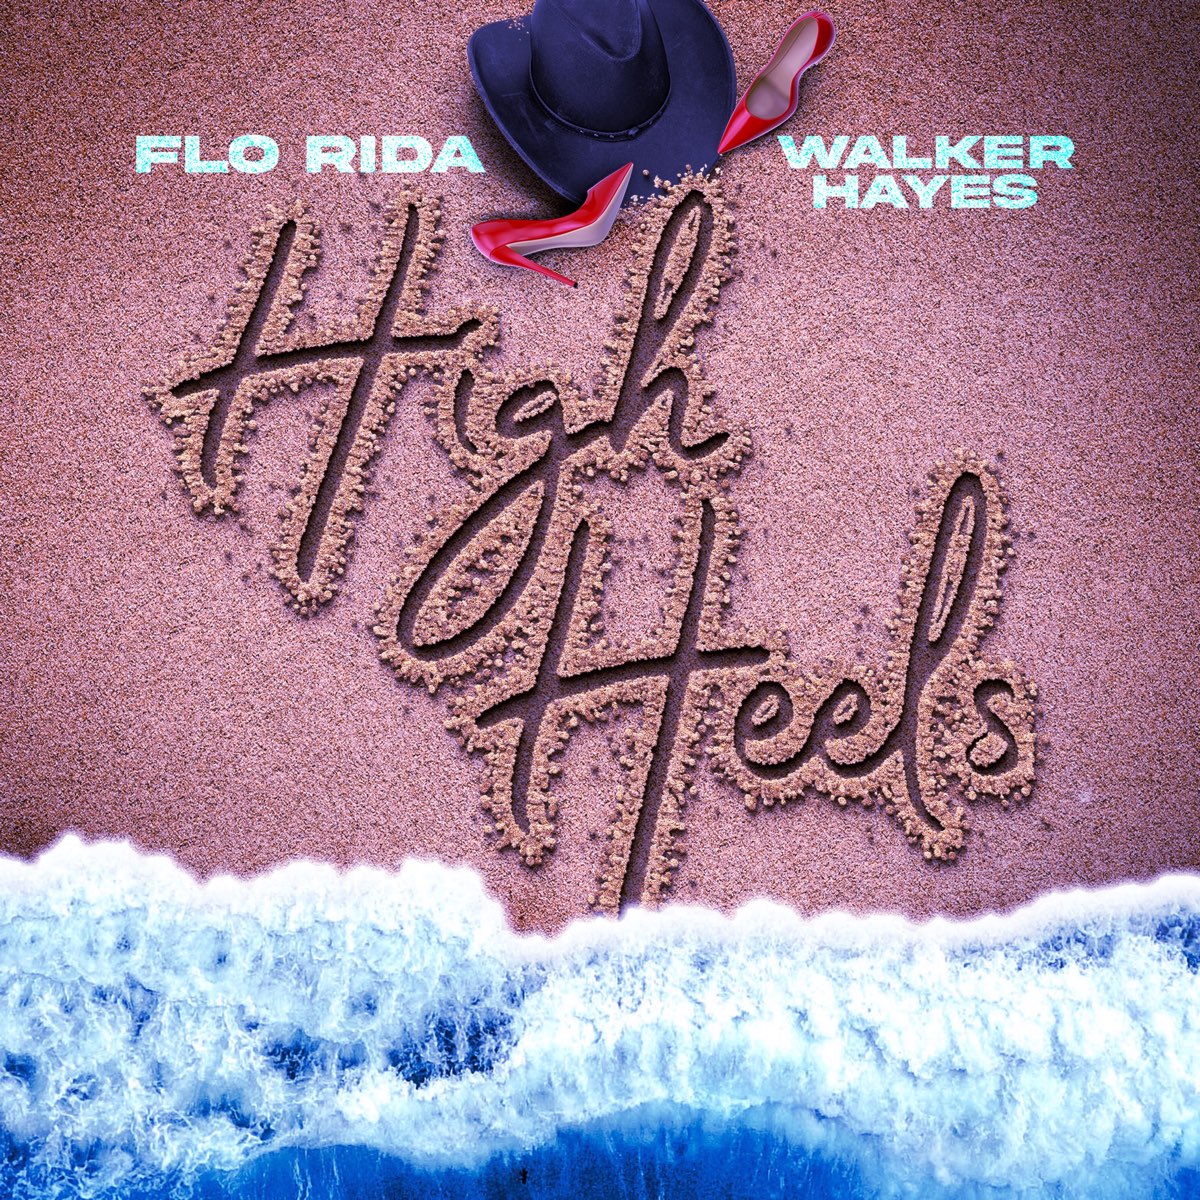 Flo Rida, Walker Hayes, & Aukoustics featuring secs on the beach — High Heels (Whistle While You Twerk) cover artwork